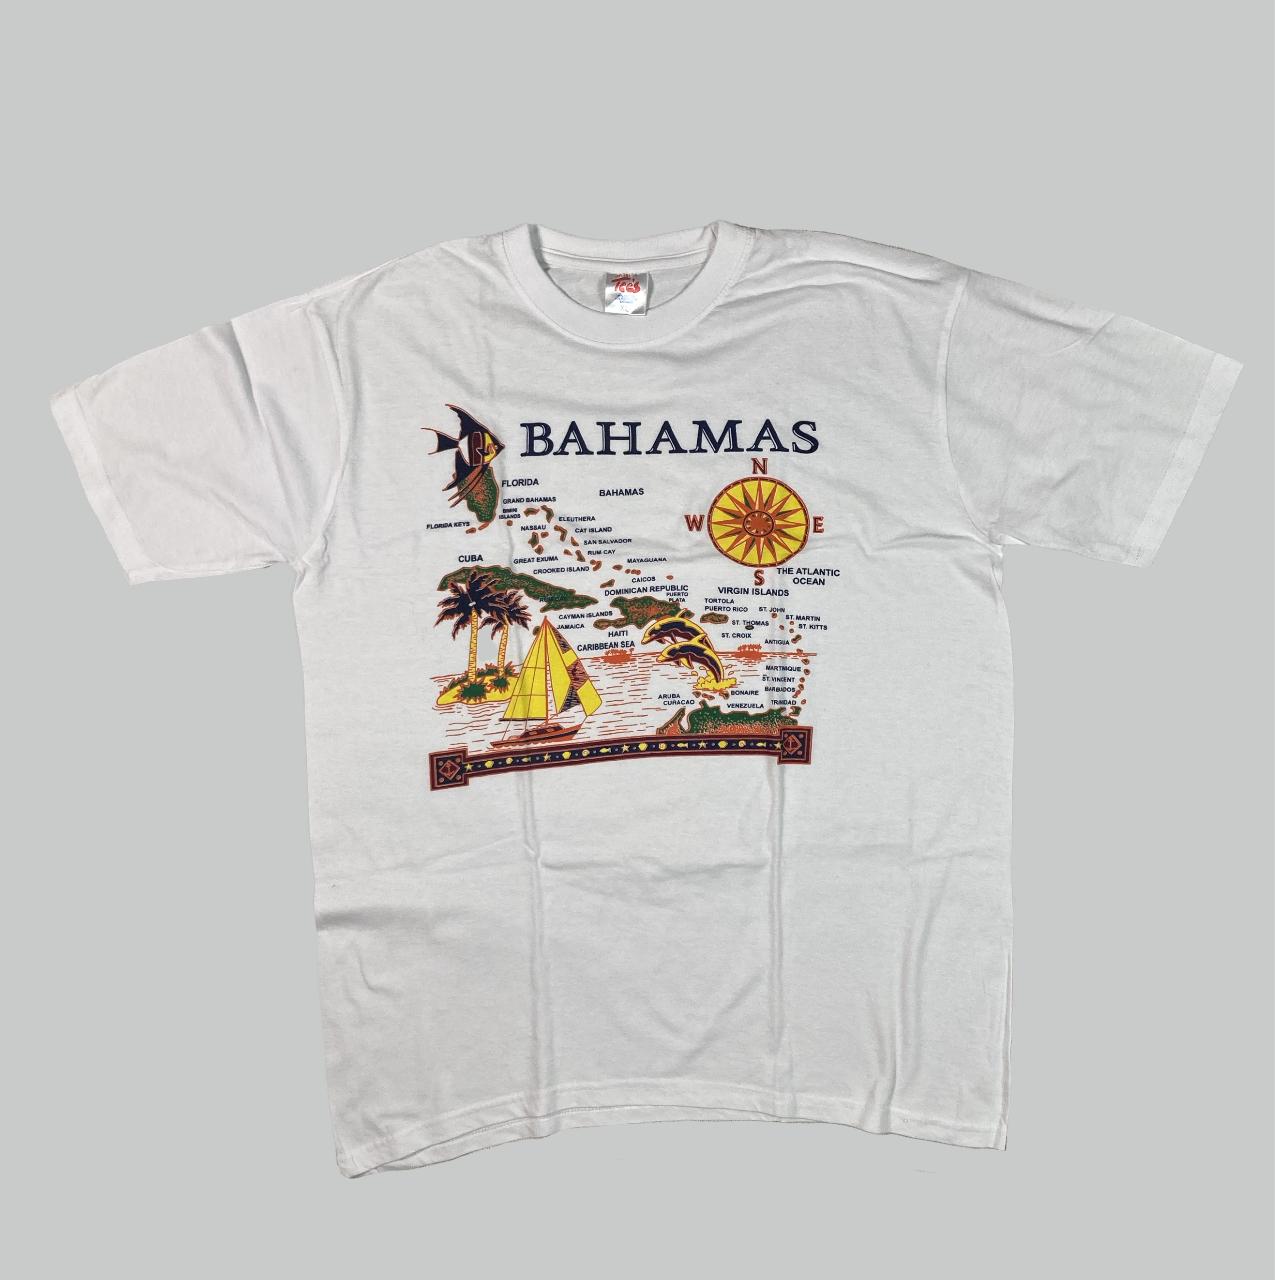 Vintage Bahamas t-shirt 90s perfect condition cool... - Depop